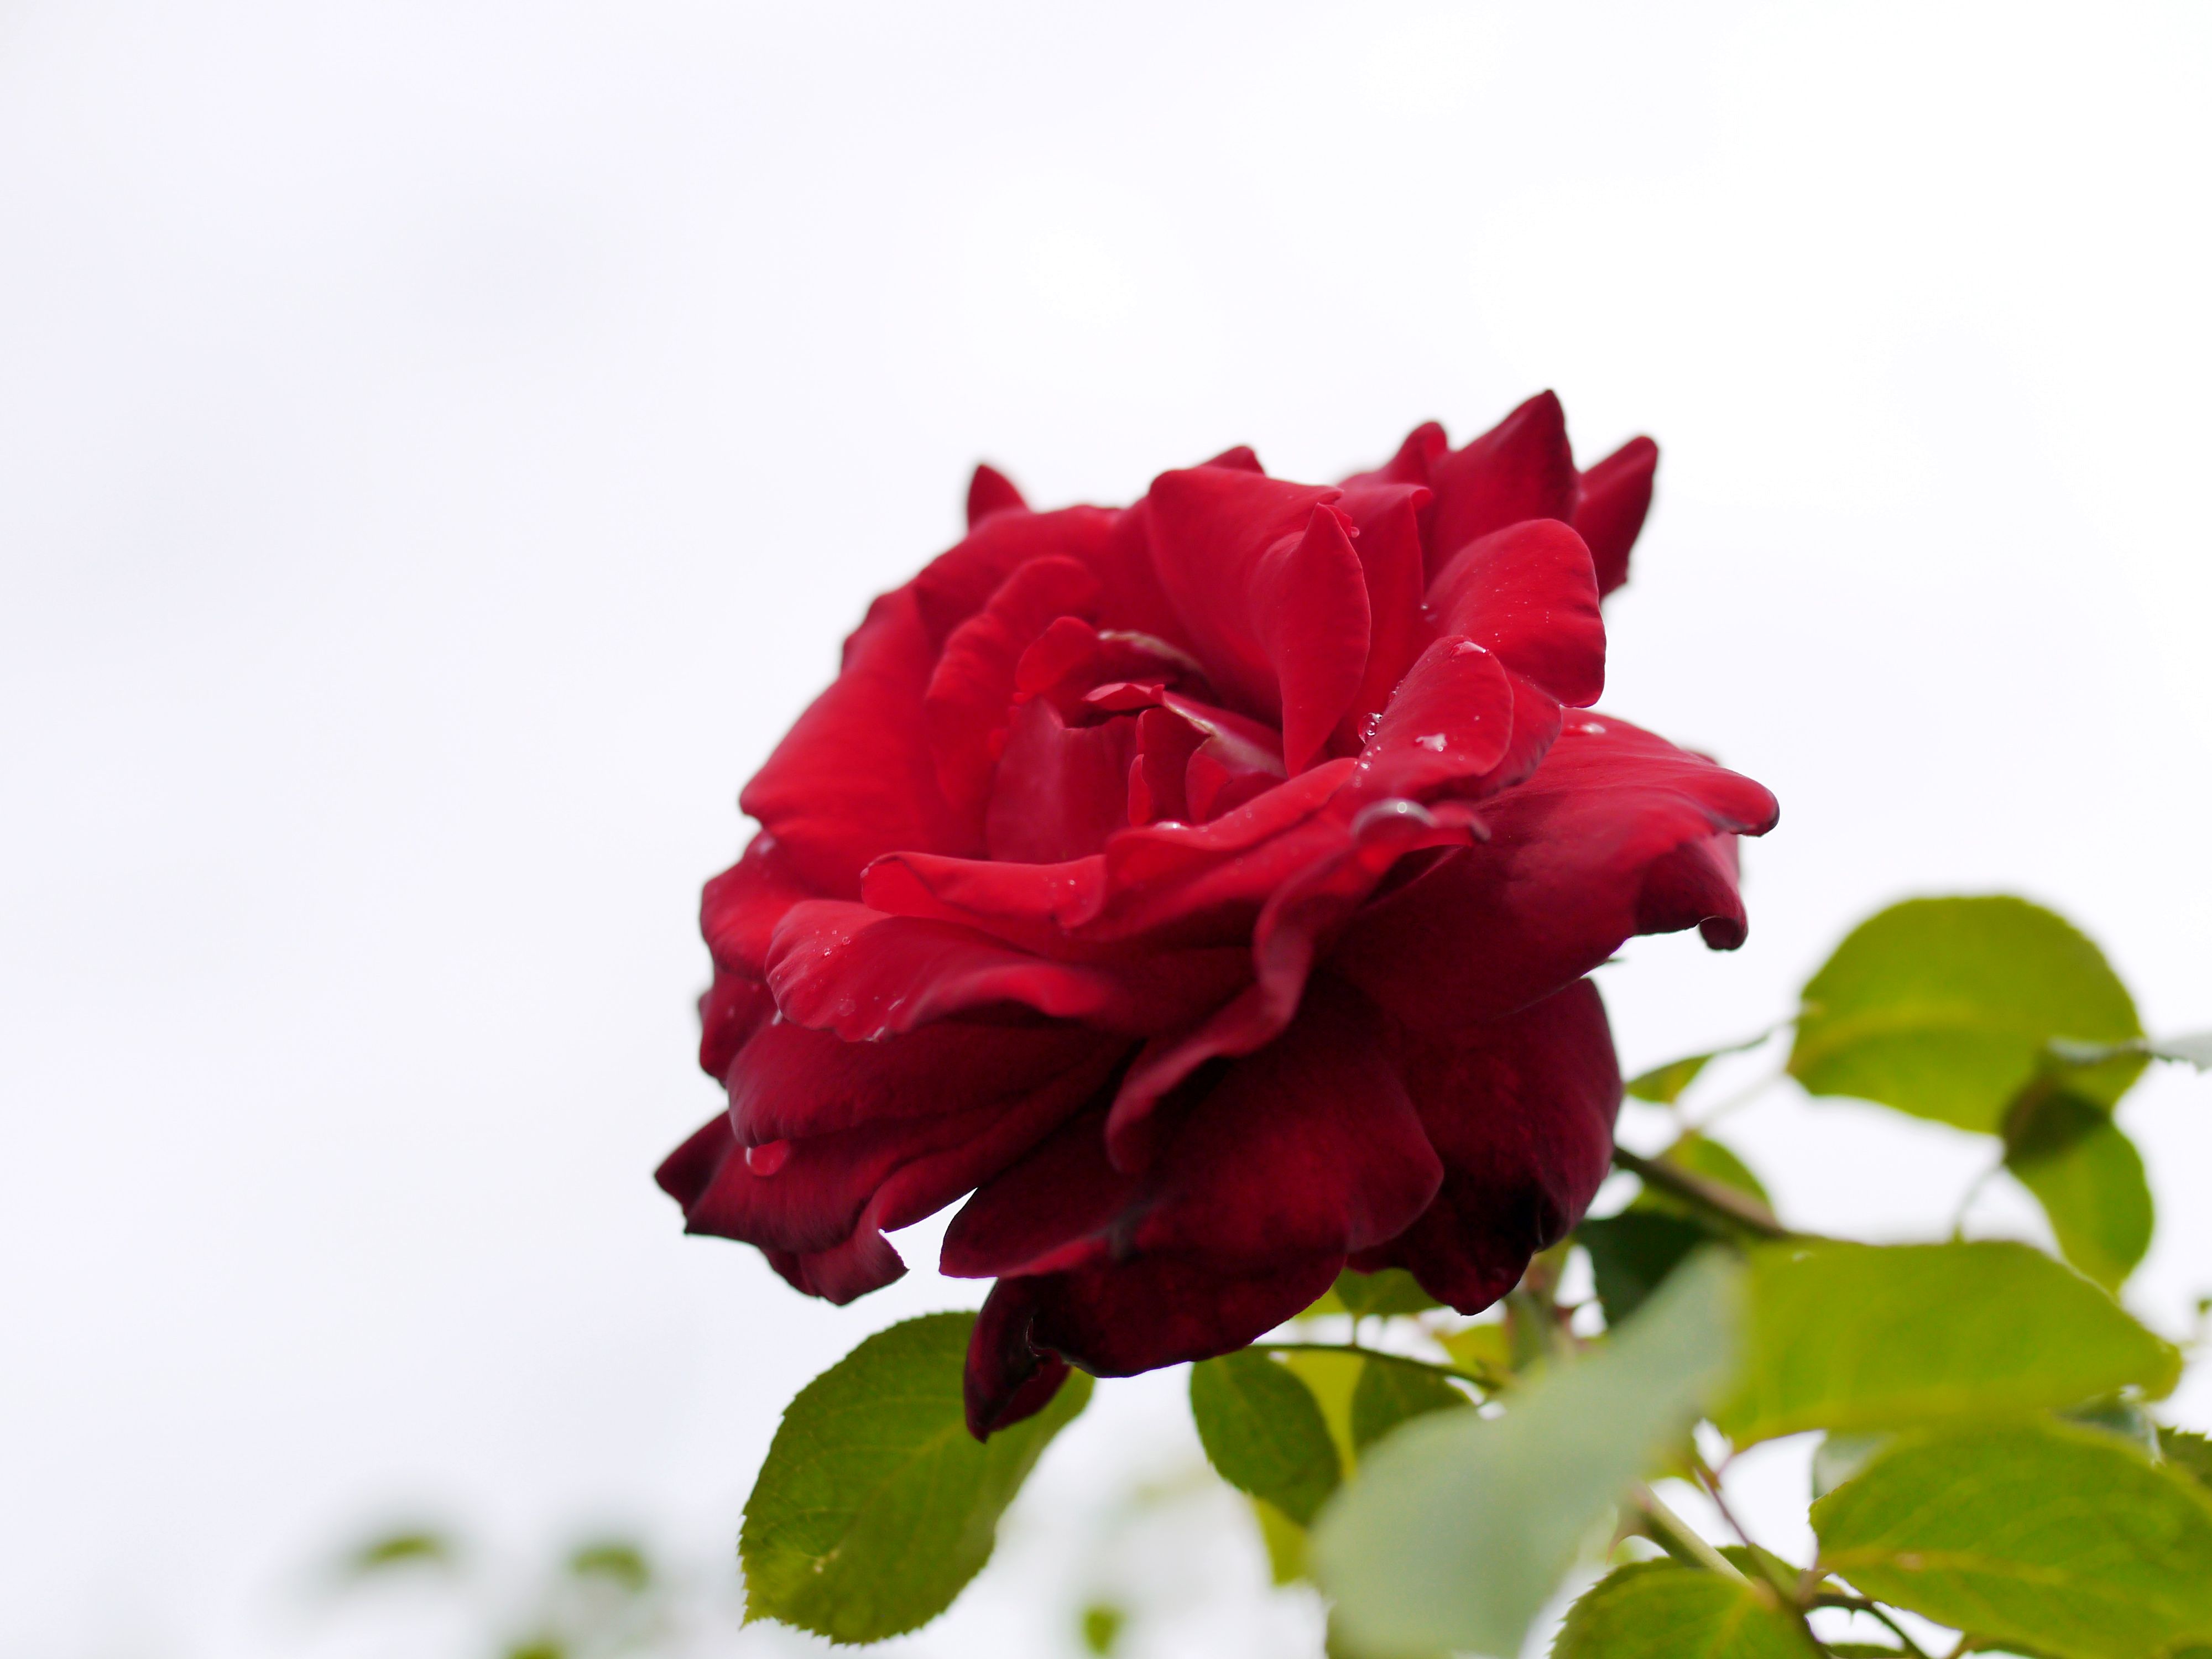 File:Rose, Le Rouge et le noir, バラ, ル ルージュ エ ル ノワール, (13190408013).jpg -  Wikimedia Commons